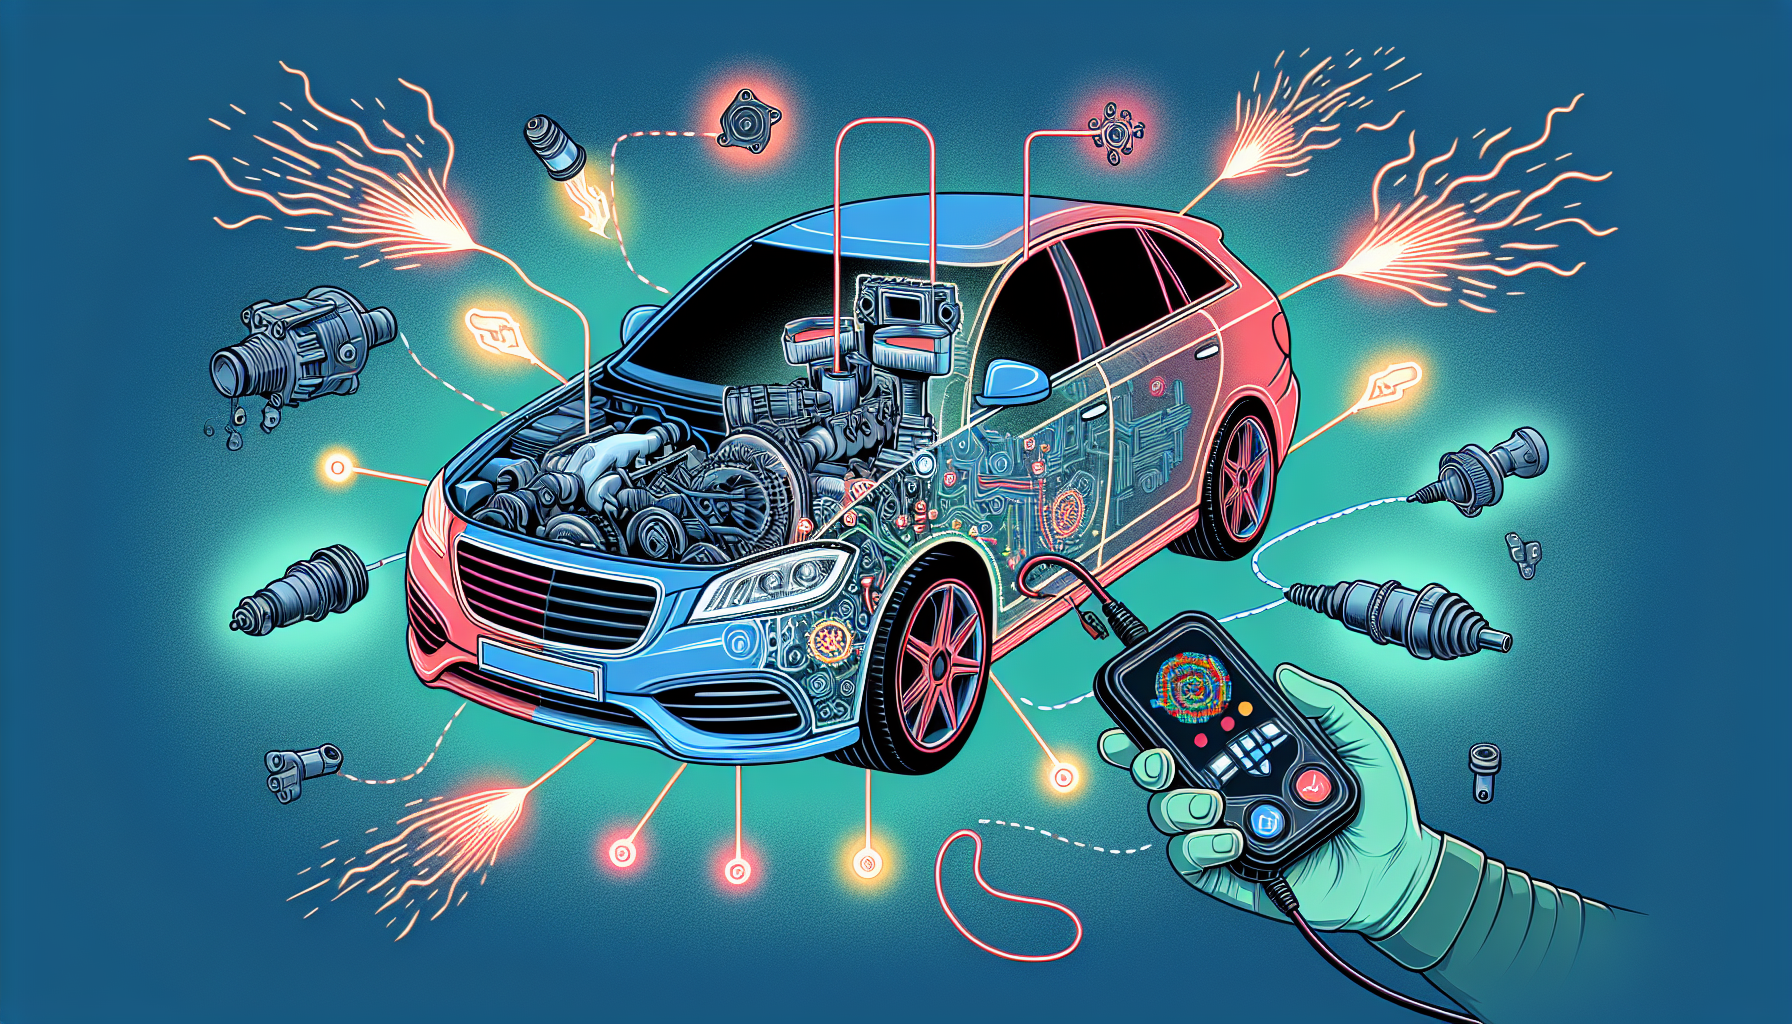 Illustration of common car issues diagnosed by diagnostic tools